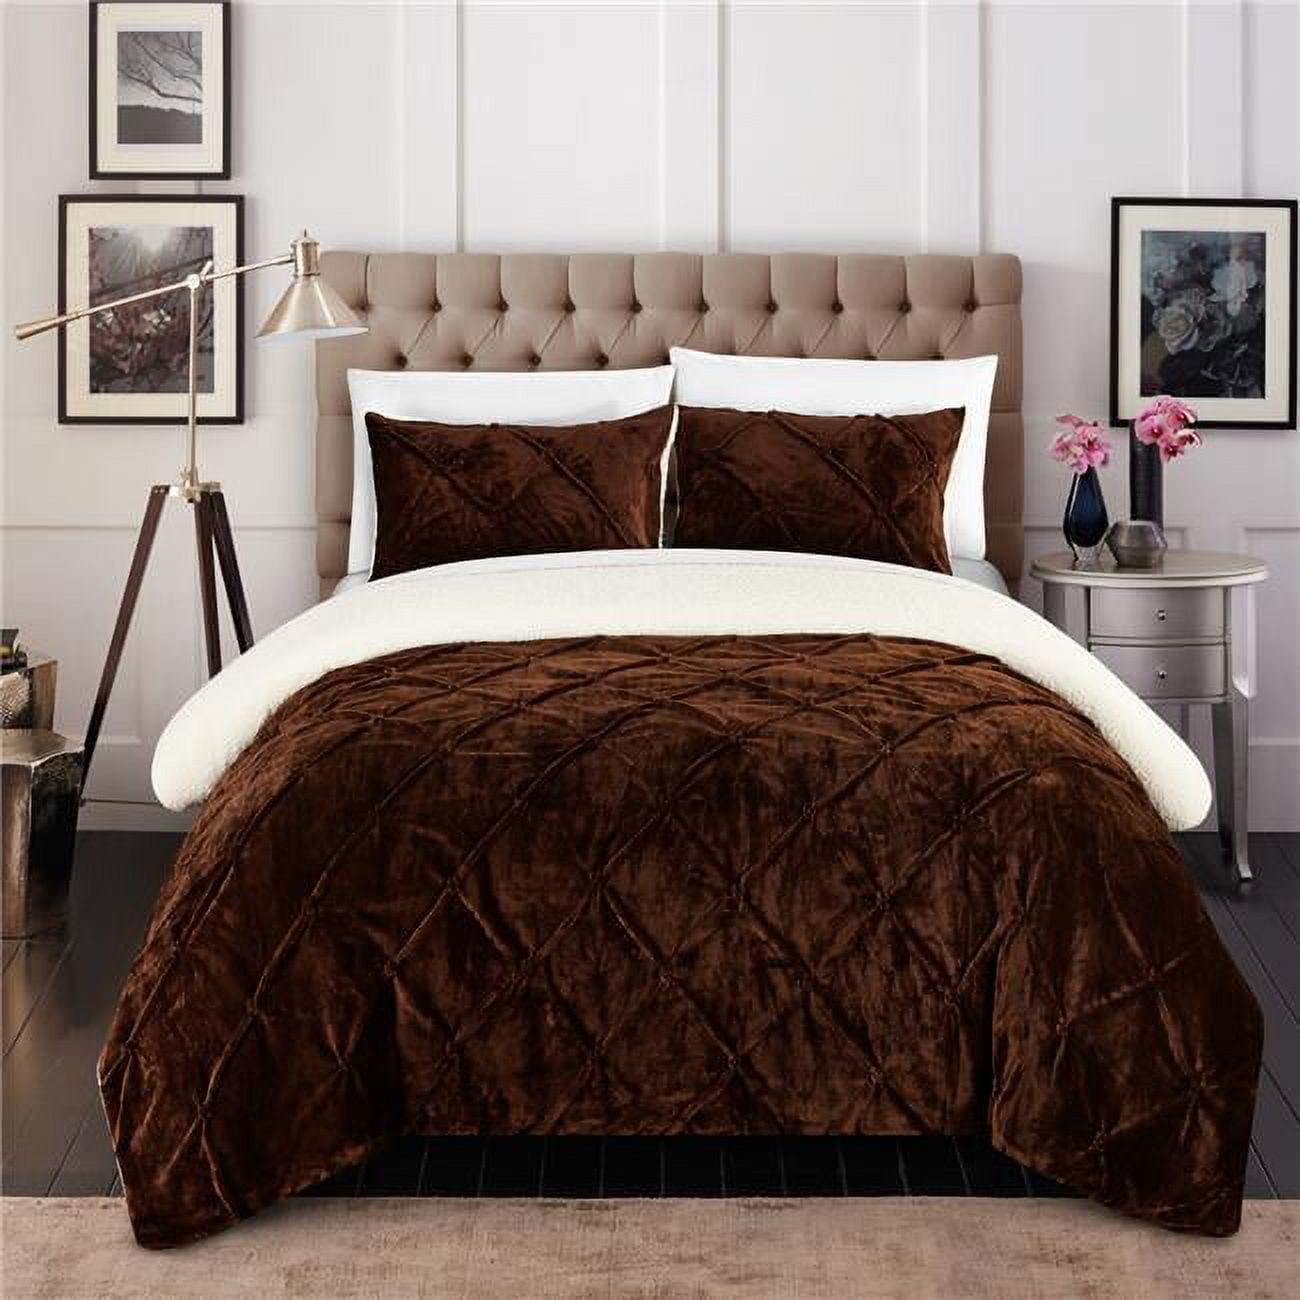 Cozy Queen Brown Down Alternative Comforter Set with Sherpa Lining